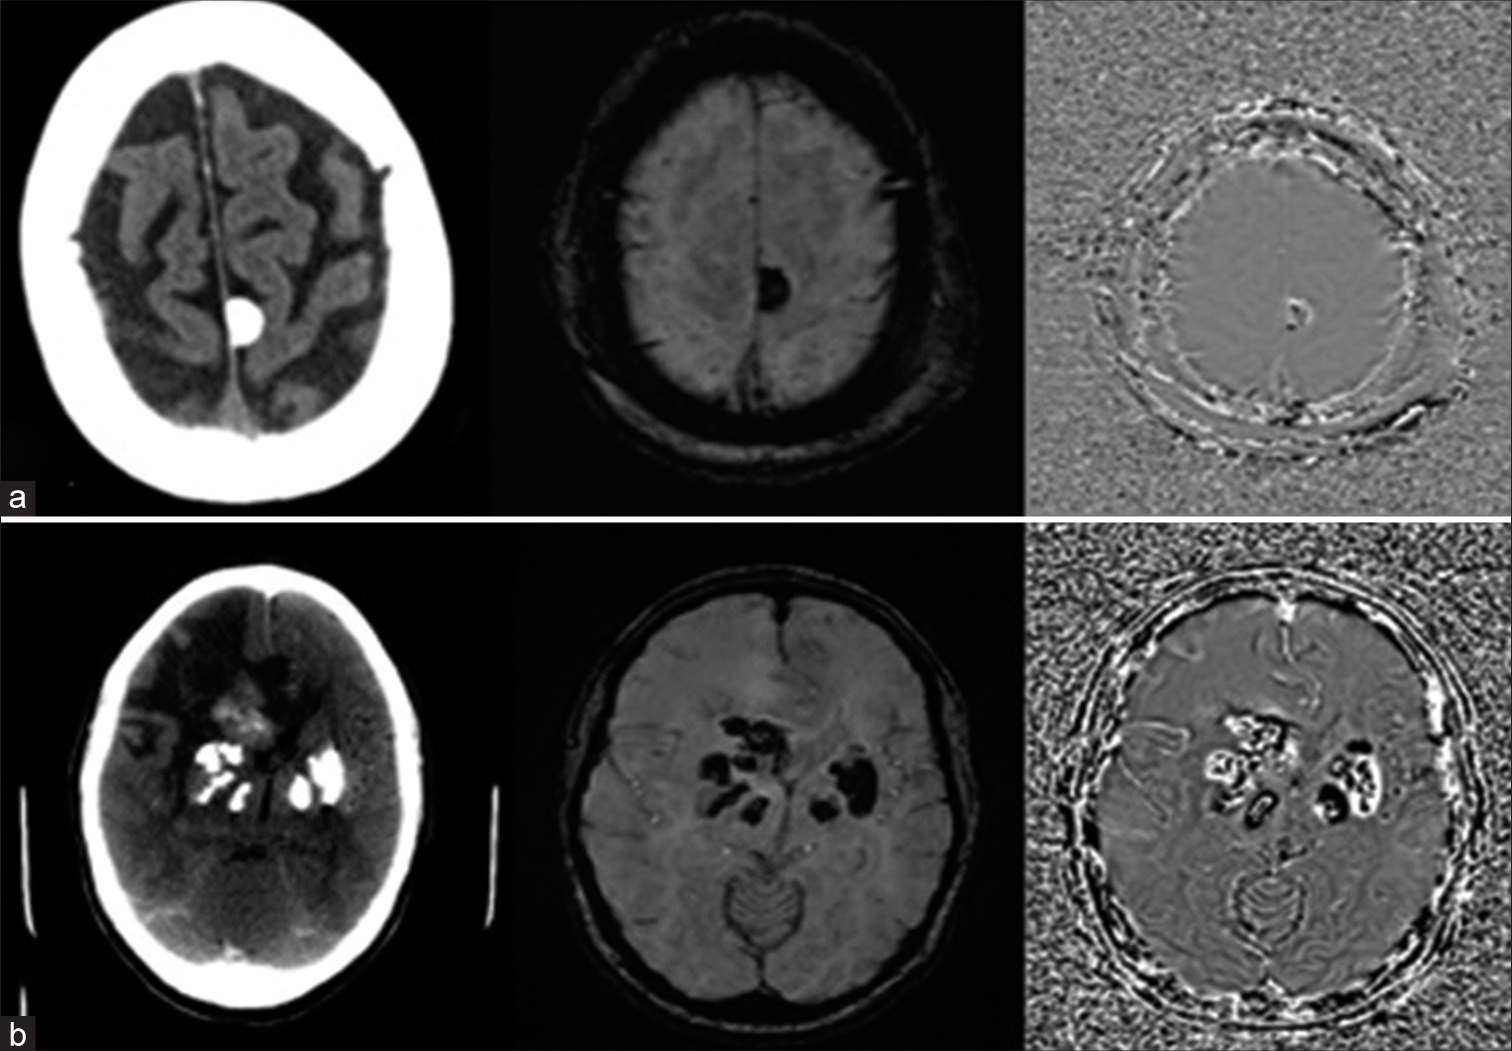 Axial computed tomography (CT) and magnetic resonance imaging (susceptibility-weighted imaging [SWI] and Phase) images in two separate patients reveal hyperdensity on CT images and foci of blooming in SWI in both patients. Phase sequence reveals (a) hypointensity in the first patient due to calcium and (b) hyperintensity in the other patient due to non-heme iron. Note: The phase description is applicable to left-handed magnetic resonance scanners.